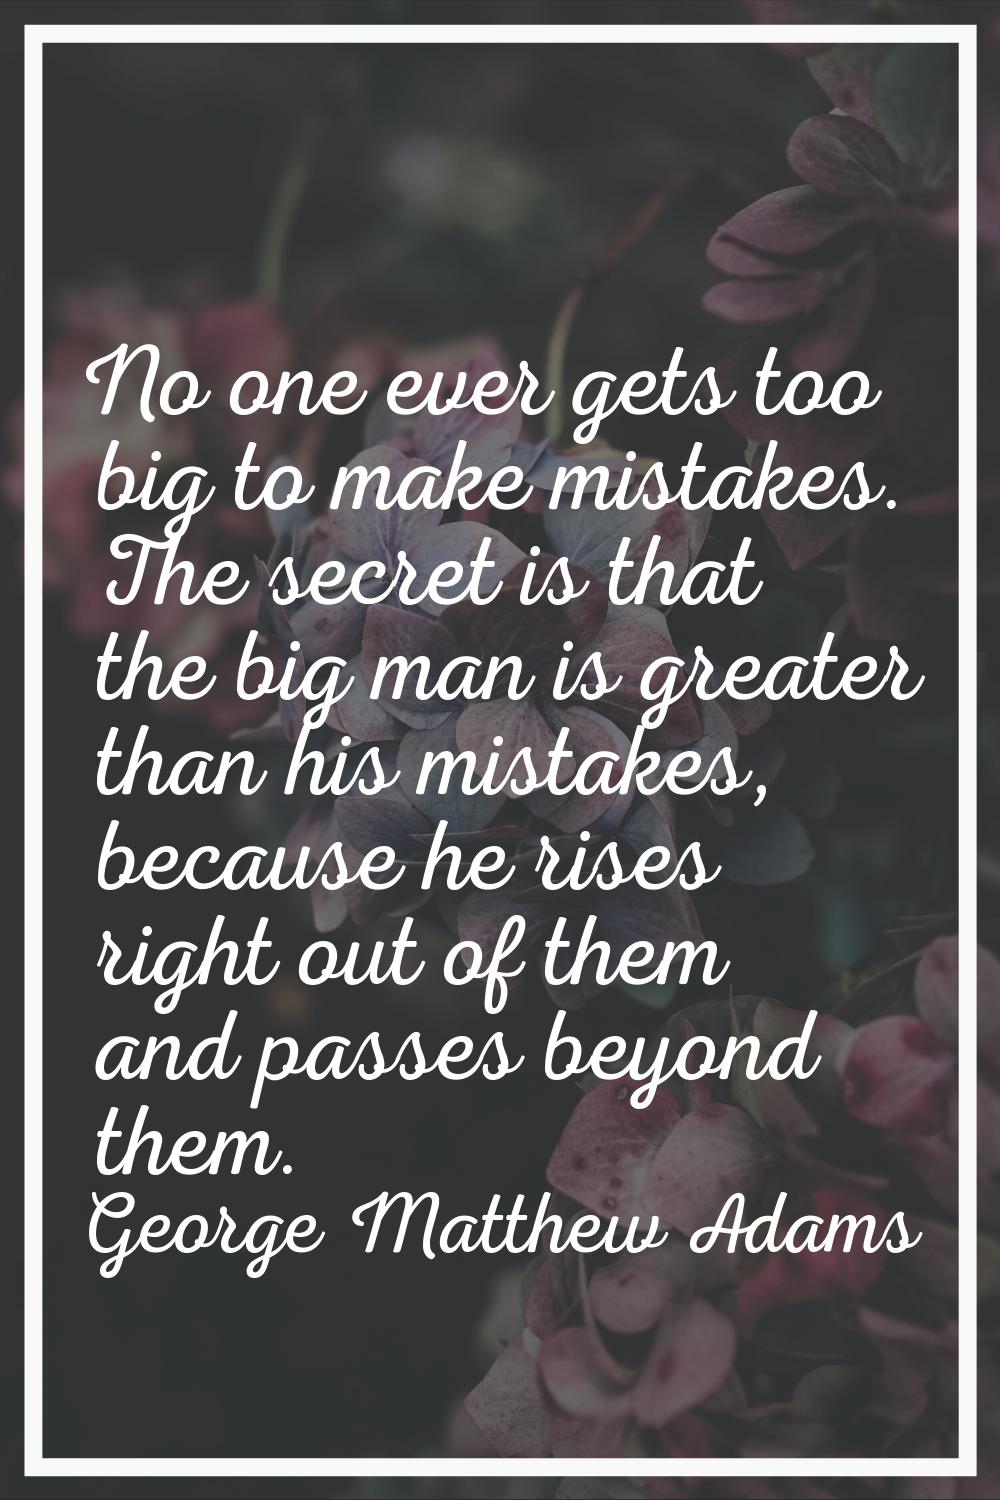 No one ever gets too big to make mistakes. The secret is that the big man is greater than his mista